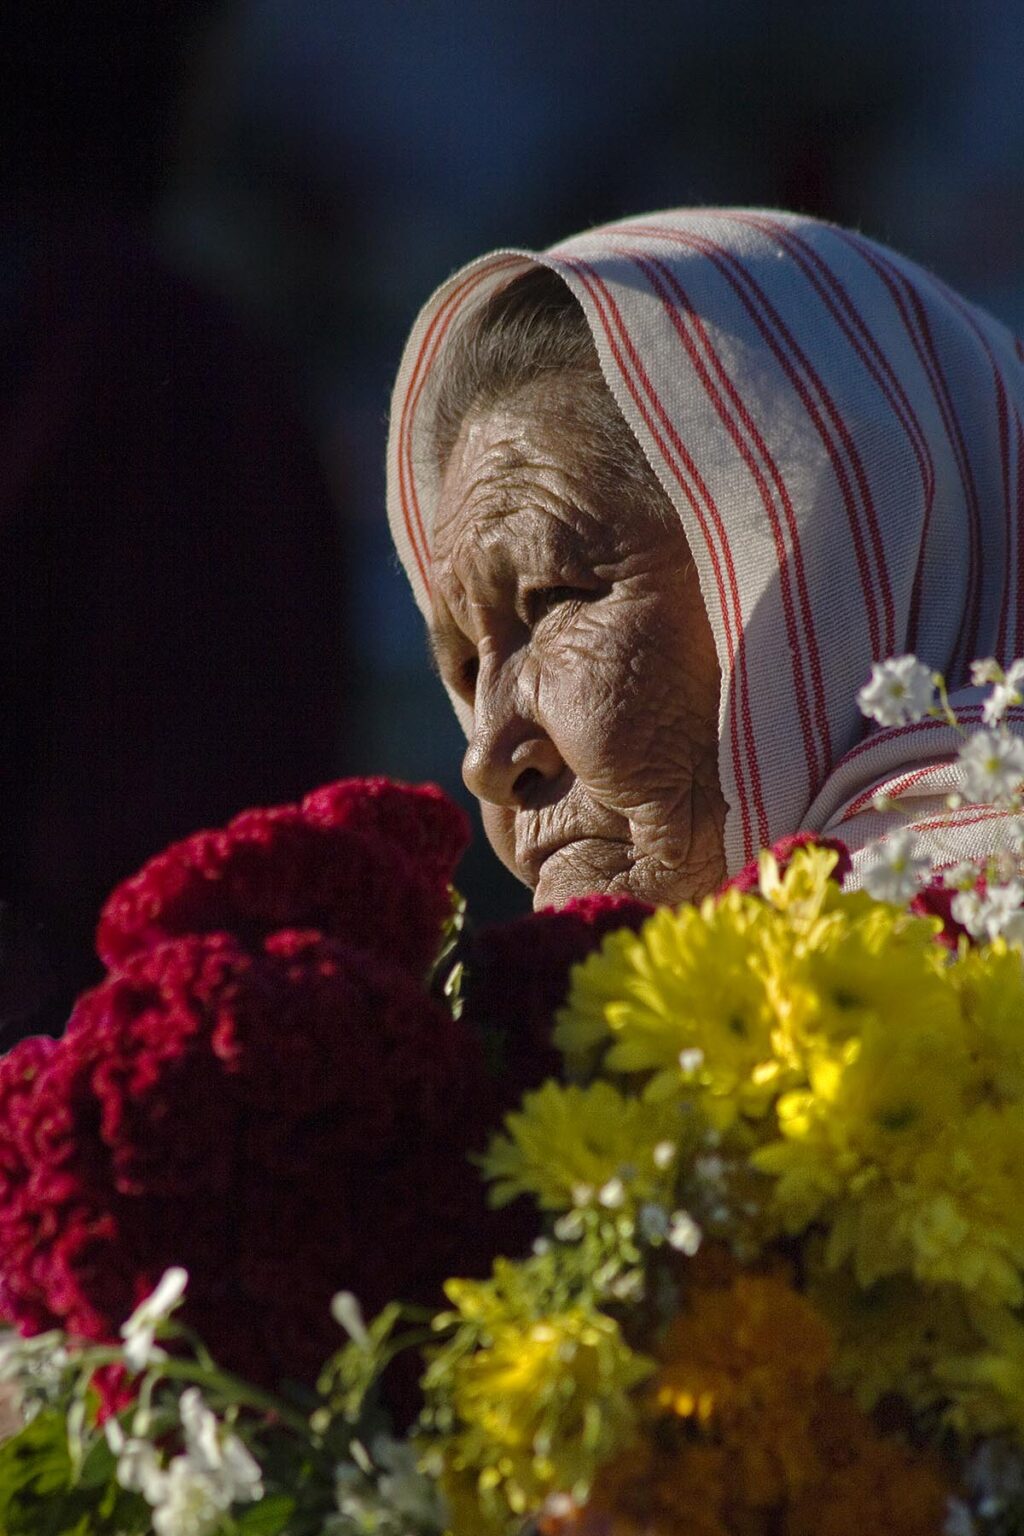 A MEXICAN grandmother brings flowers to the cemetery during the DEAD OF THE DEAD - SAN MIGUEL DE ALLENDE, MEXICO